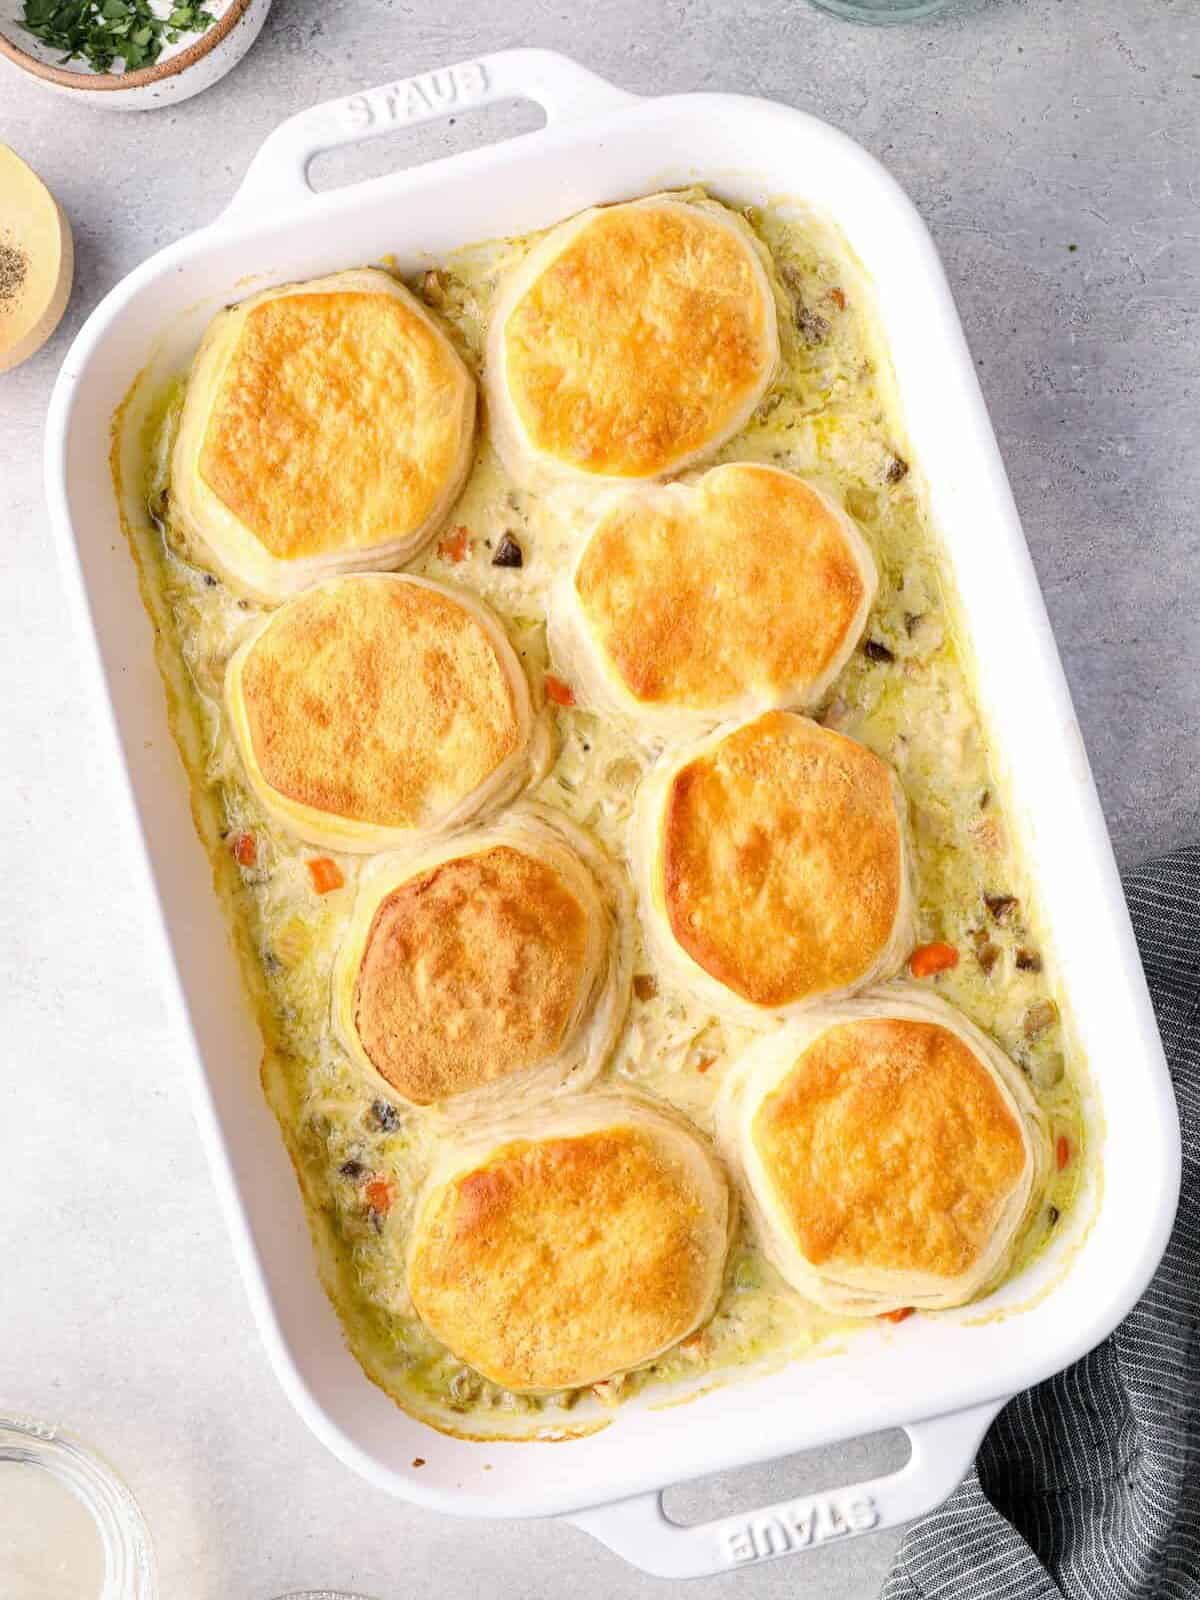 chicken pot pie casserole topped with biscuits in a white baking dish after baking